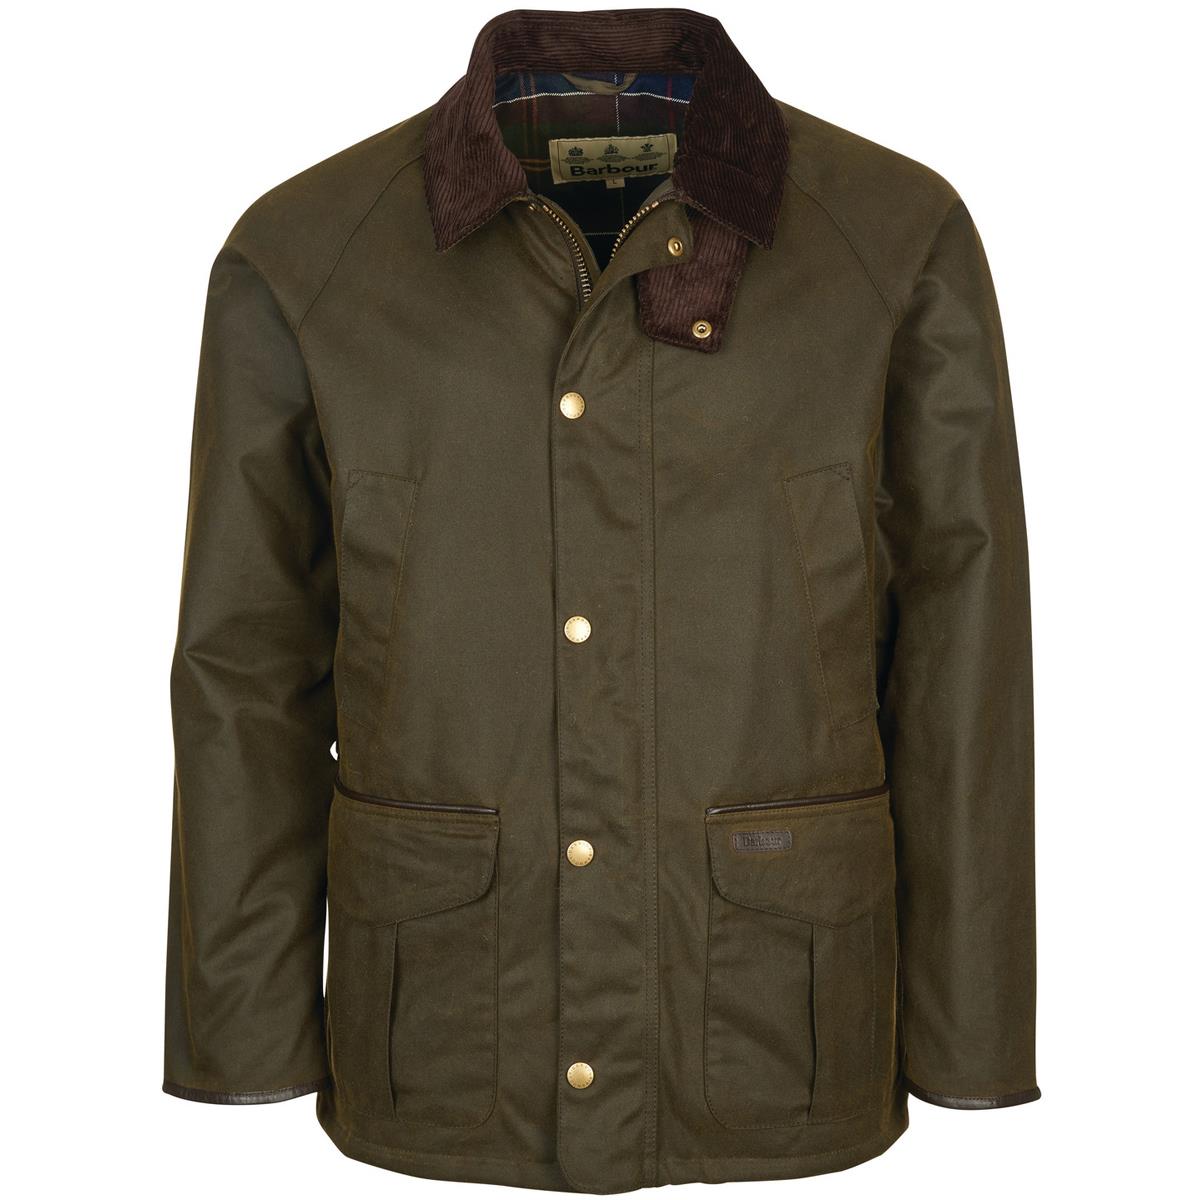 Can you list the features of the Barbour Mens Stratford Wax Jacket?